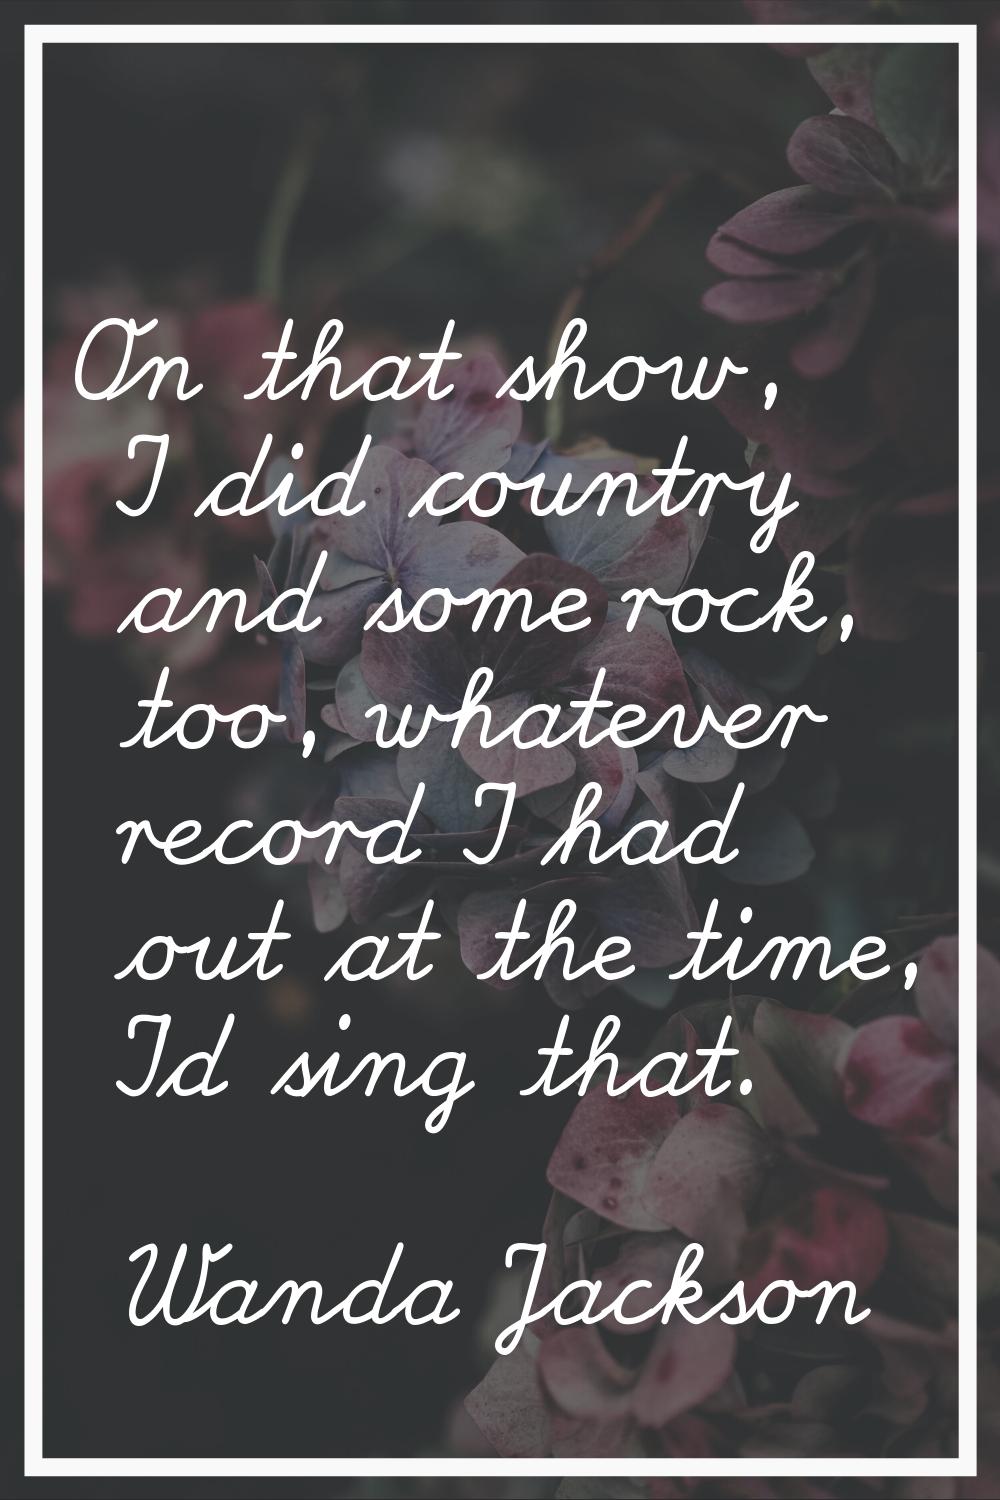 On that show, I did country and some rock, too, whatever record I had out at the time, I'd sing tha